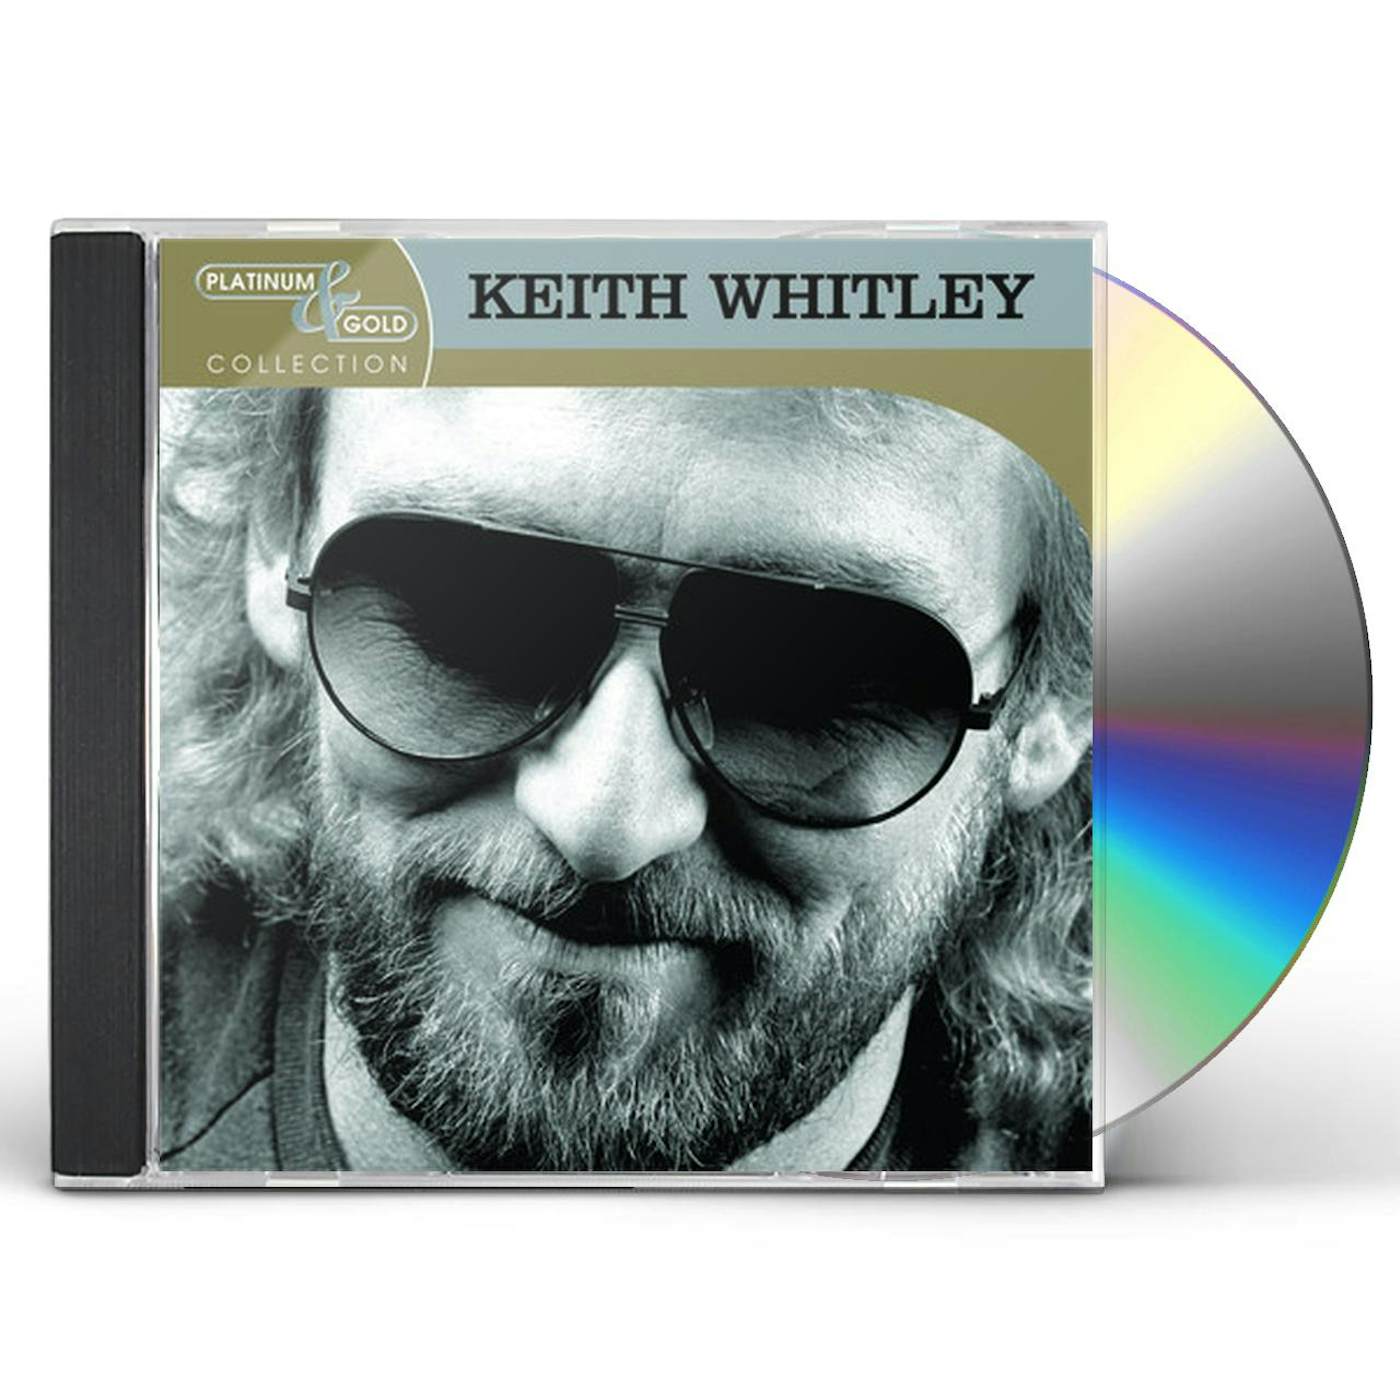 Keith Whitley PLATINUM & GOLD COLLECTION CD